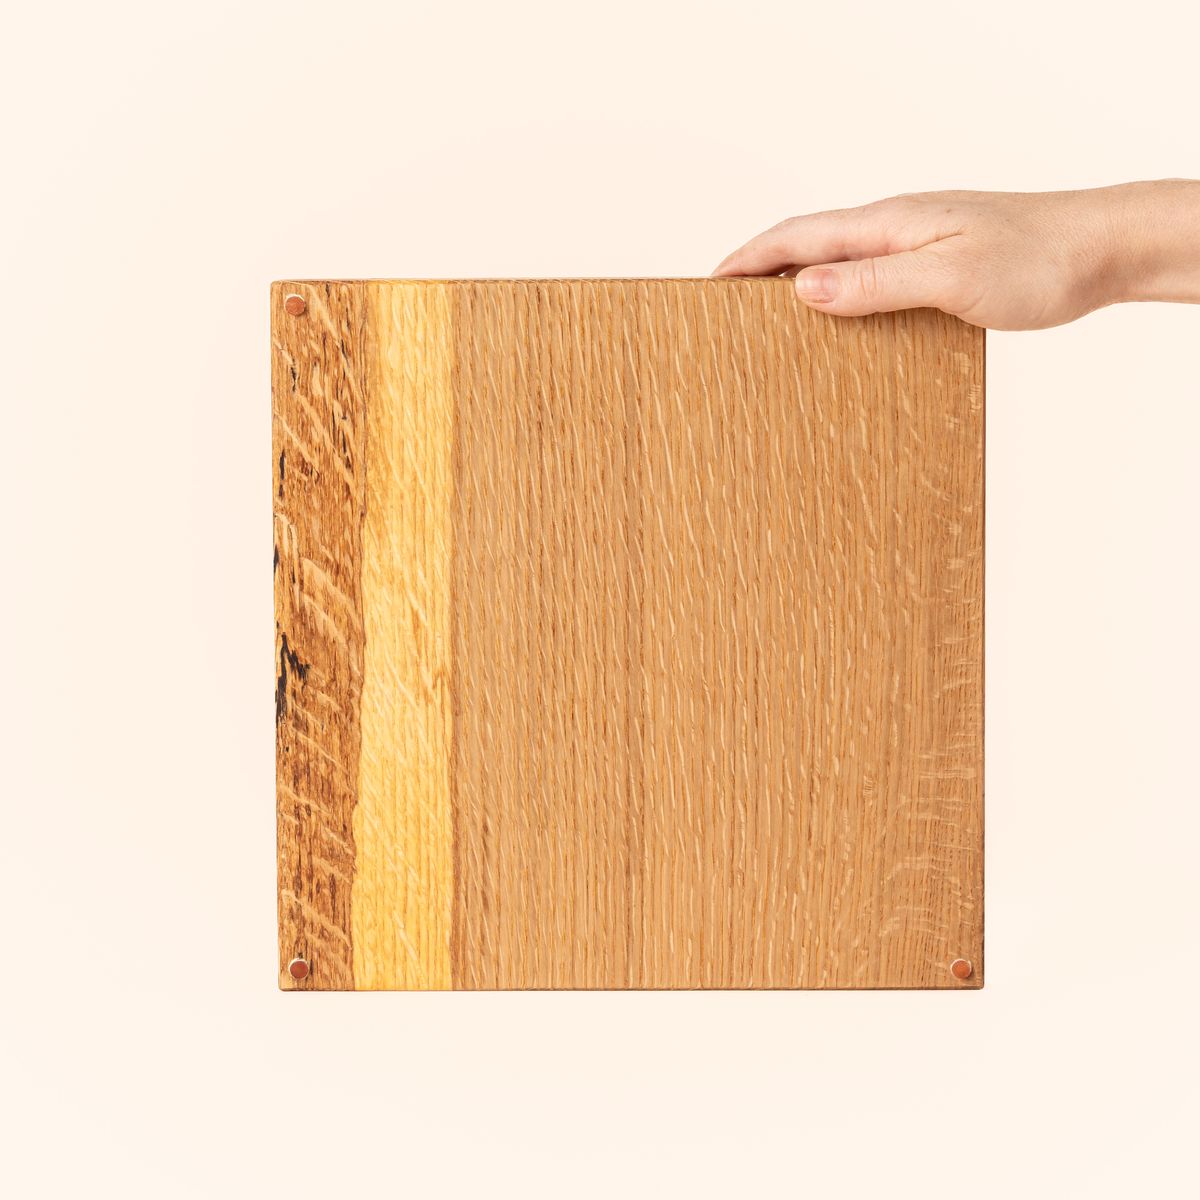 Hand holds up a thick rectangular cutting board made of light-colored wood